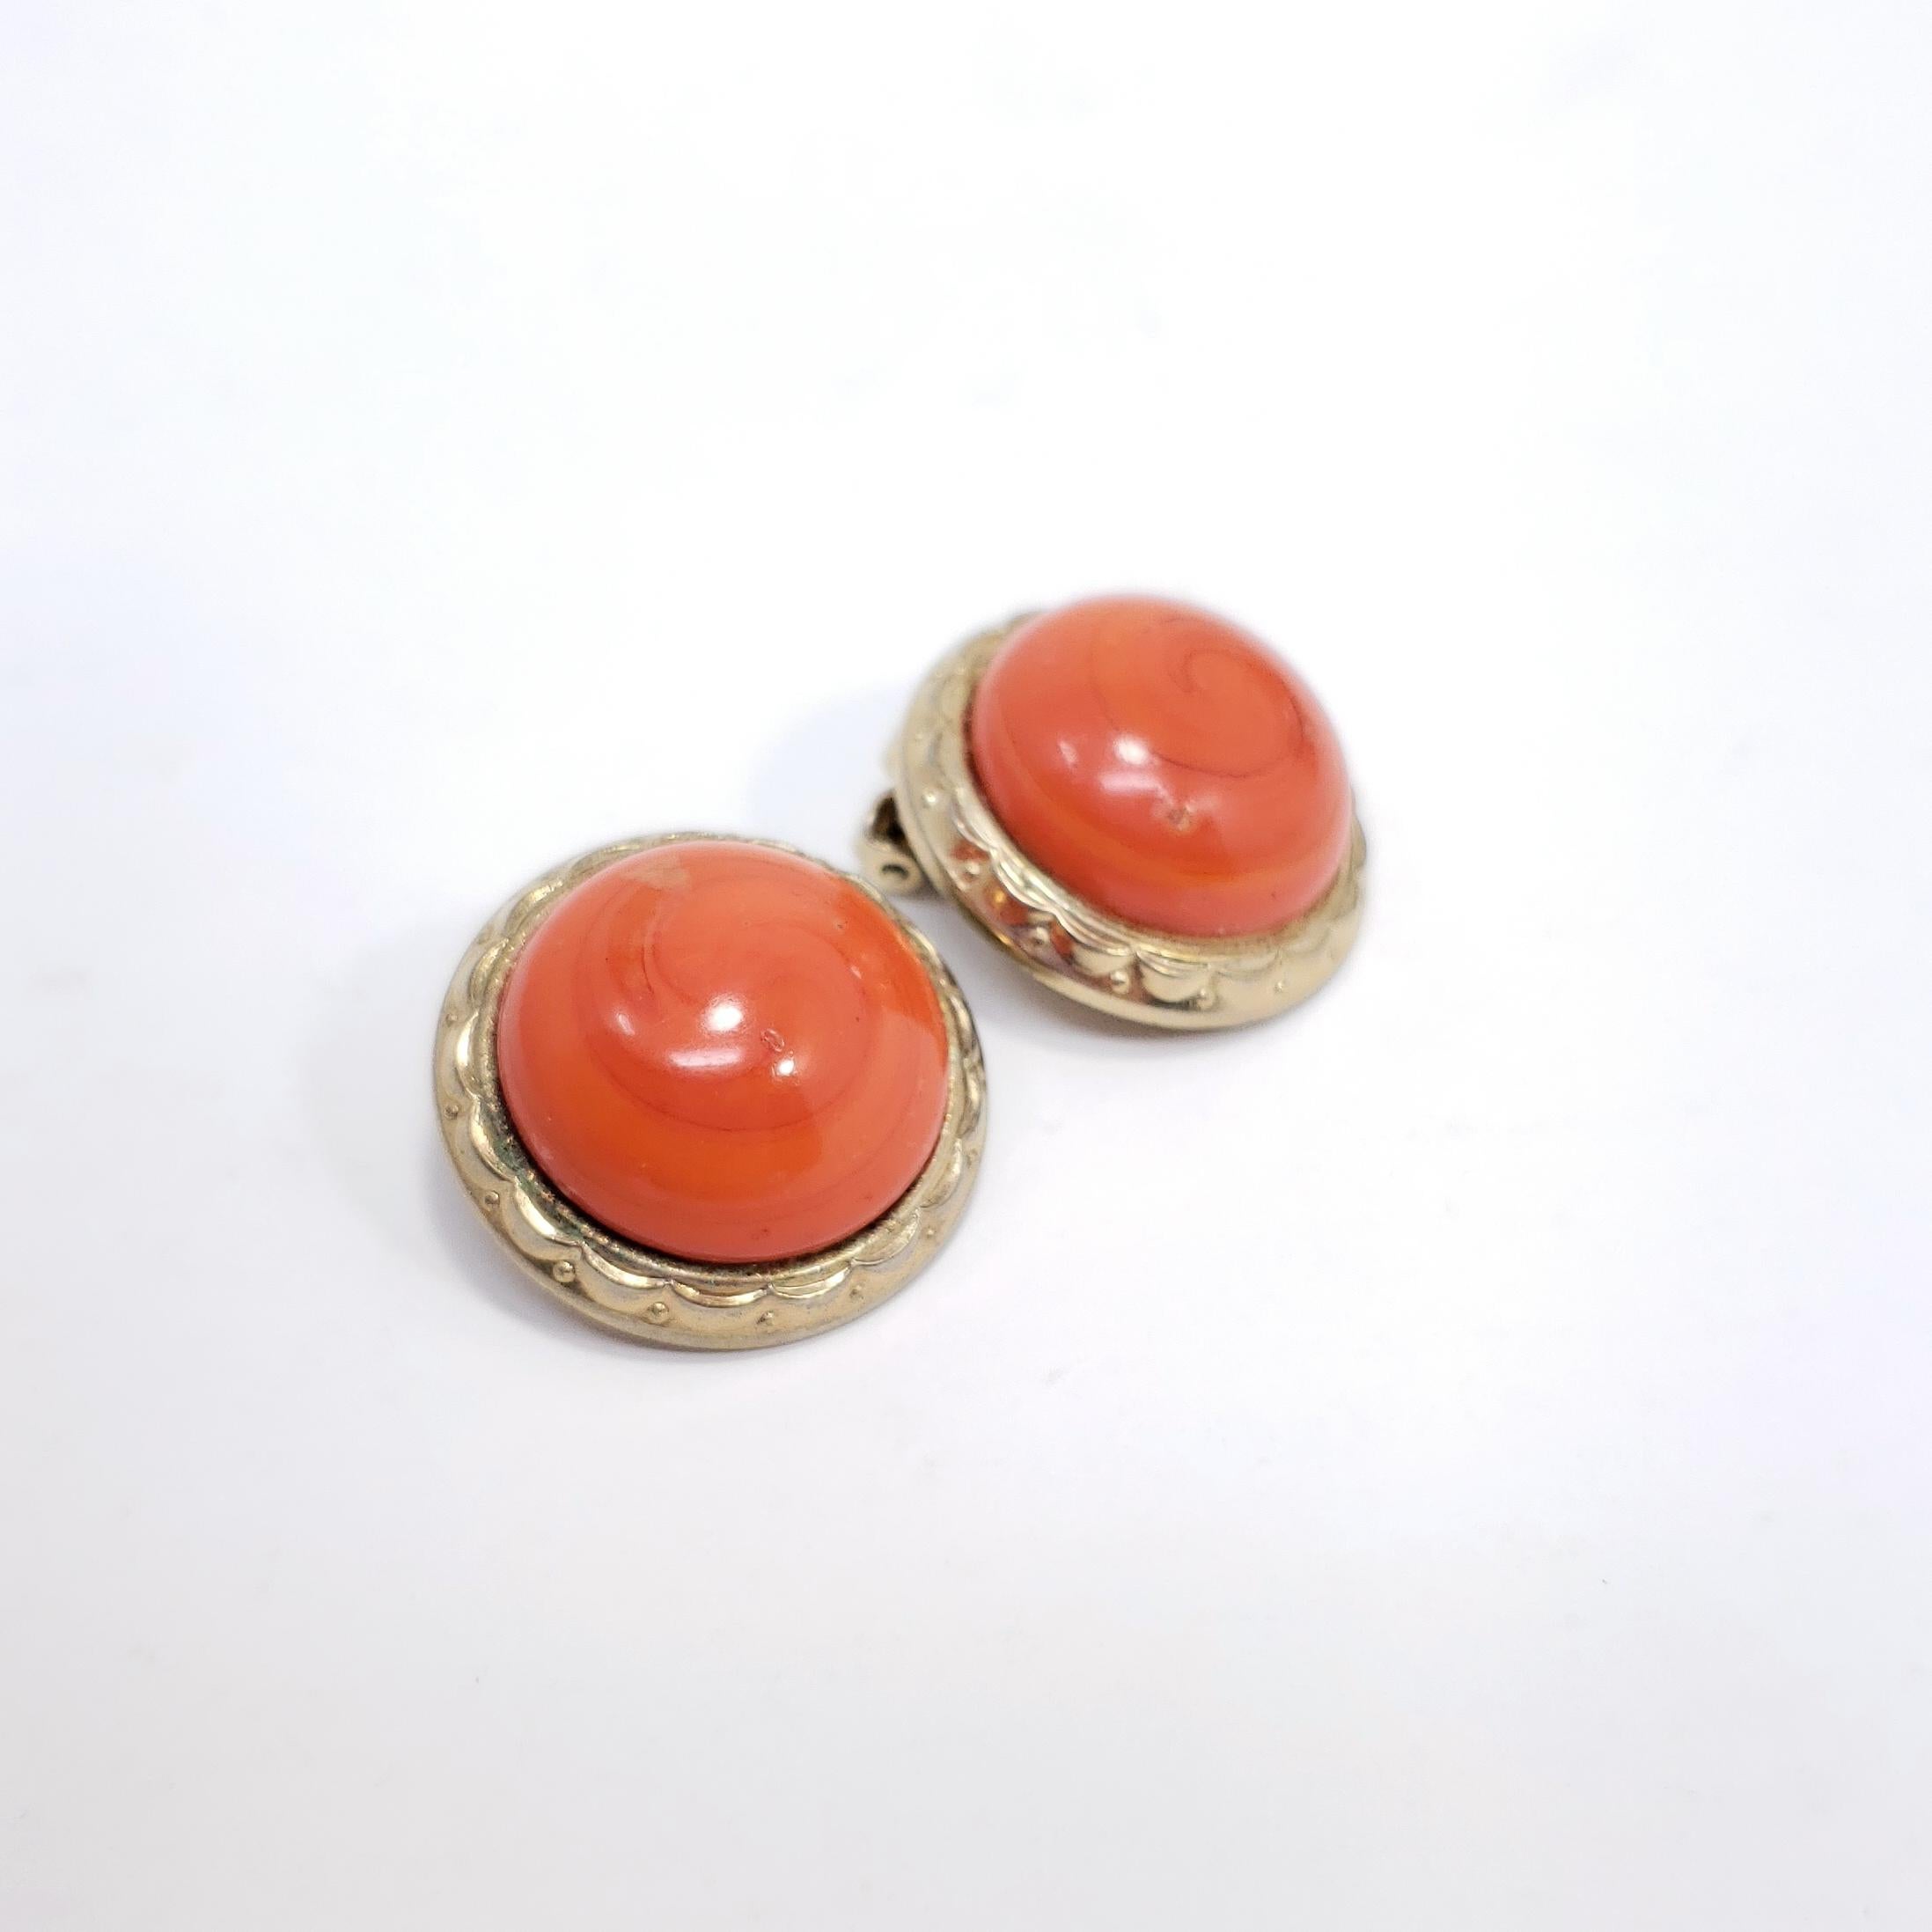 A pair of clip on earrings from costume jewelry designer Bergere. Each earring features a vibrant coral=colored cabochon set in a round golden clip.

Circa 1960s. gold plated.

Marks / hallmarks / etc: Bergere